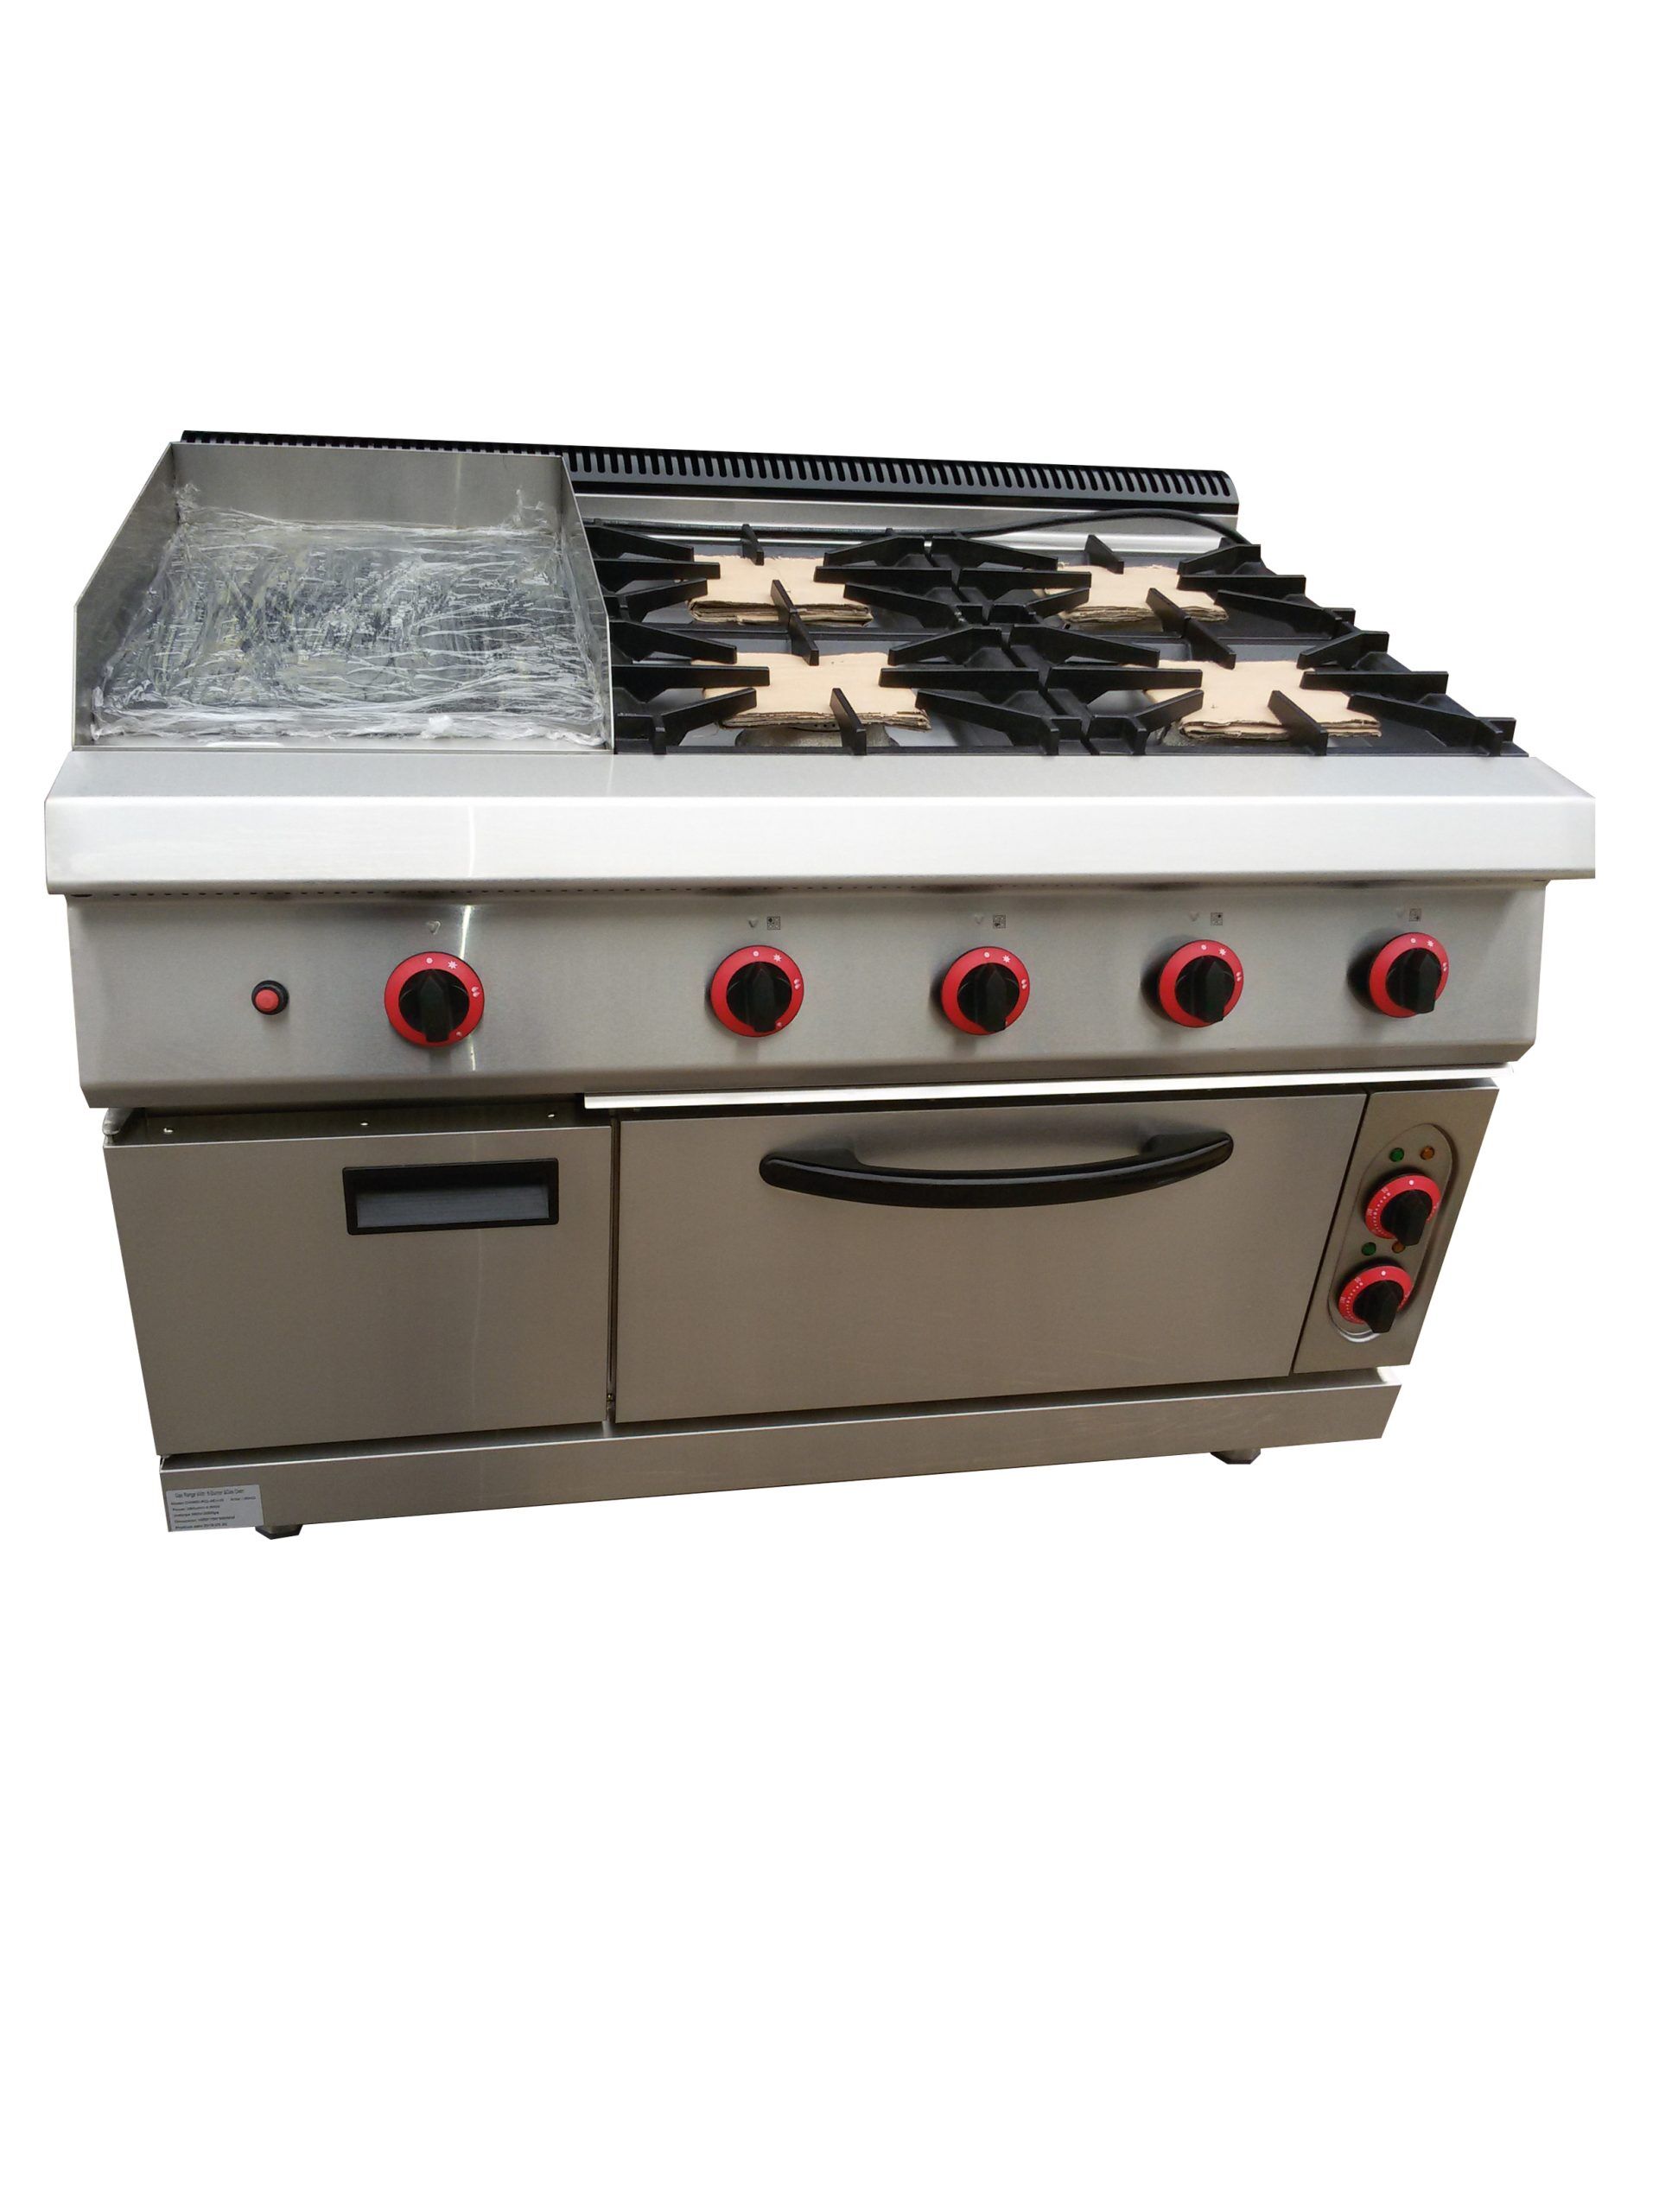 Cooking Range With Multi-Burner Griddle & Electric – Commercial Kitchen Stove (options)